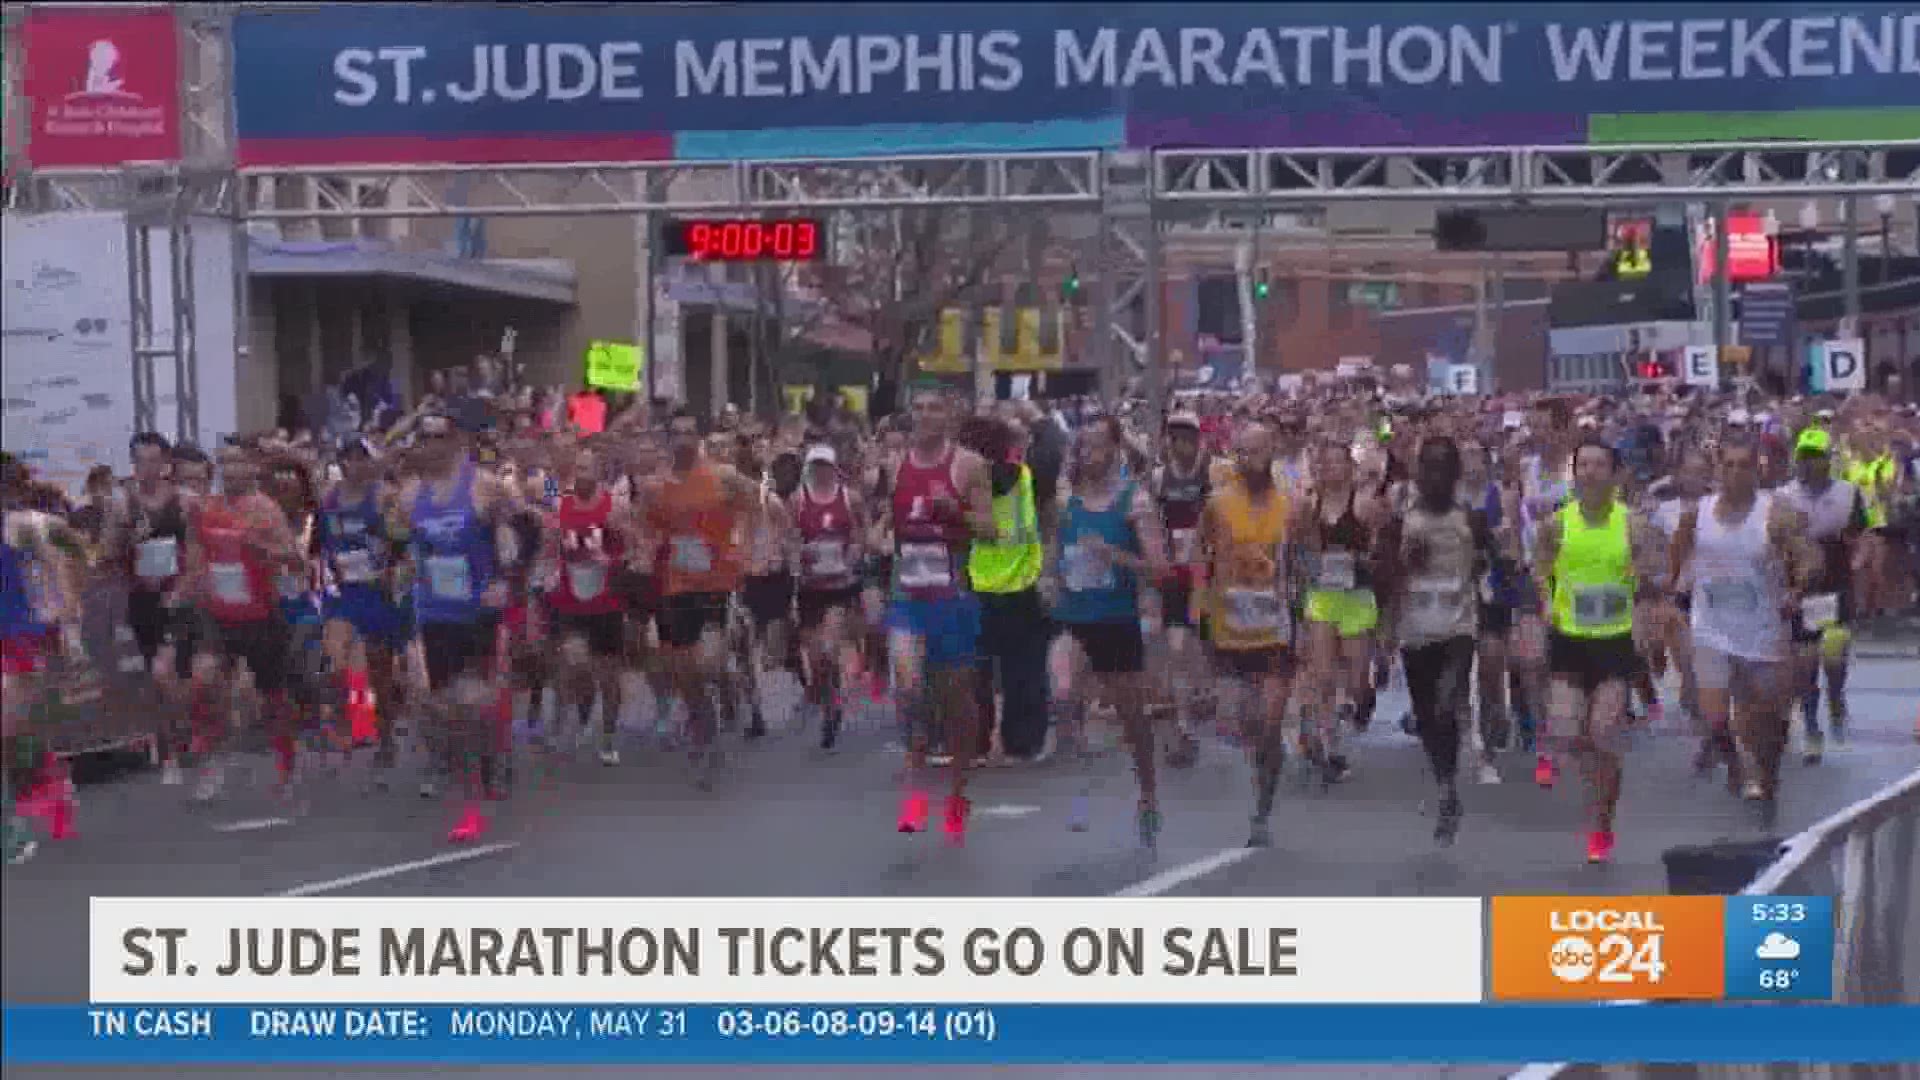 The St. Jude Memphis Marathon is making its in-person return after being virtual in 2020.